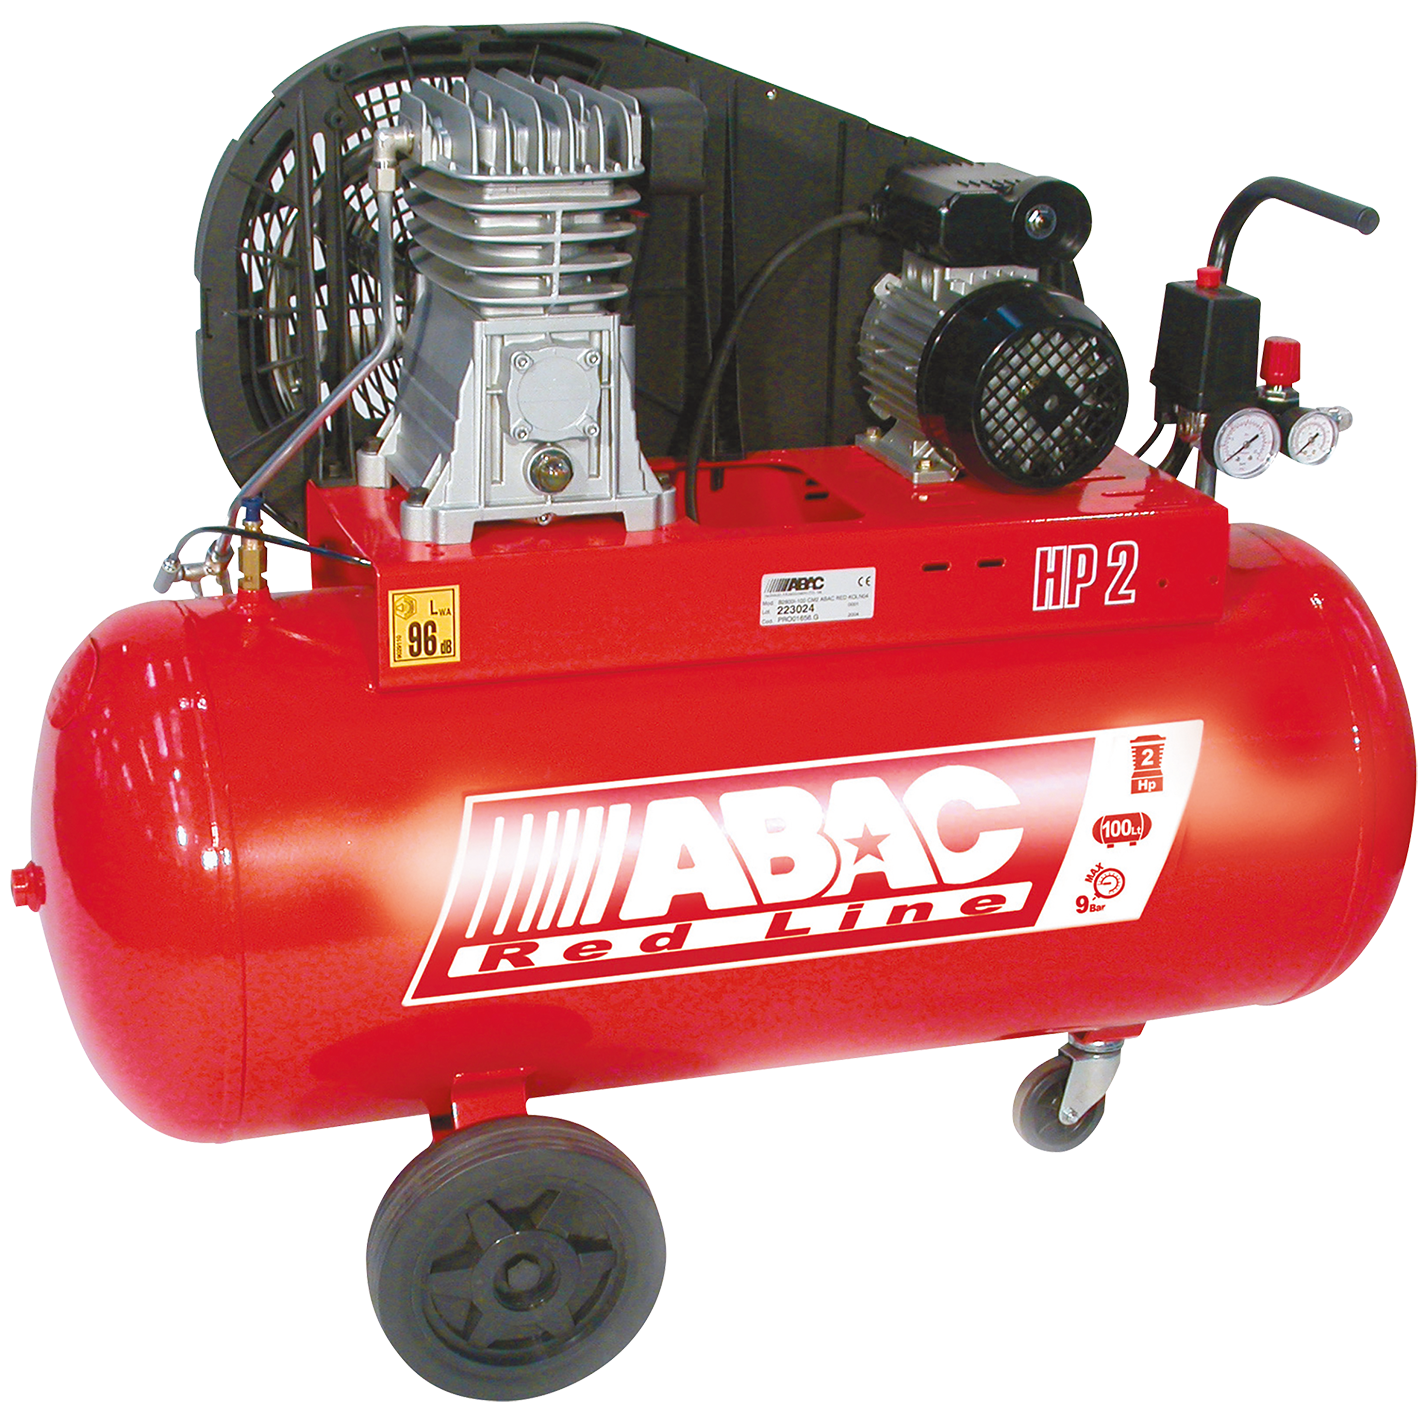 UK's Leading Suppliers of High Quality Portable Compressors